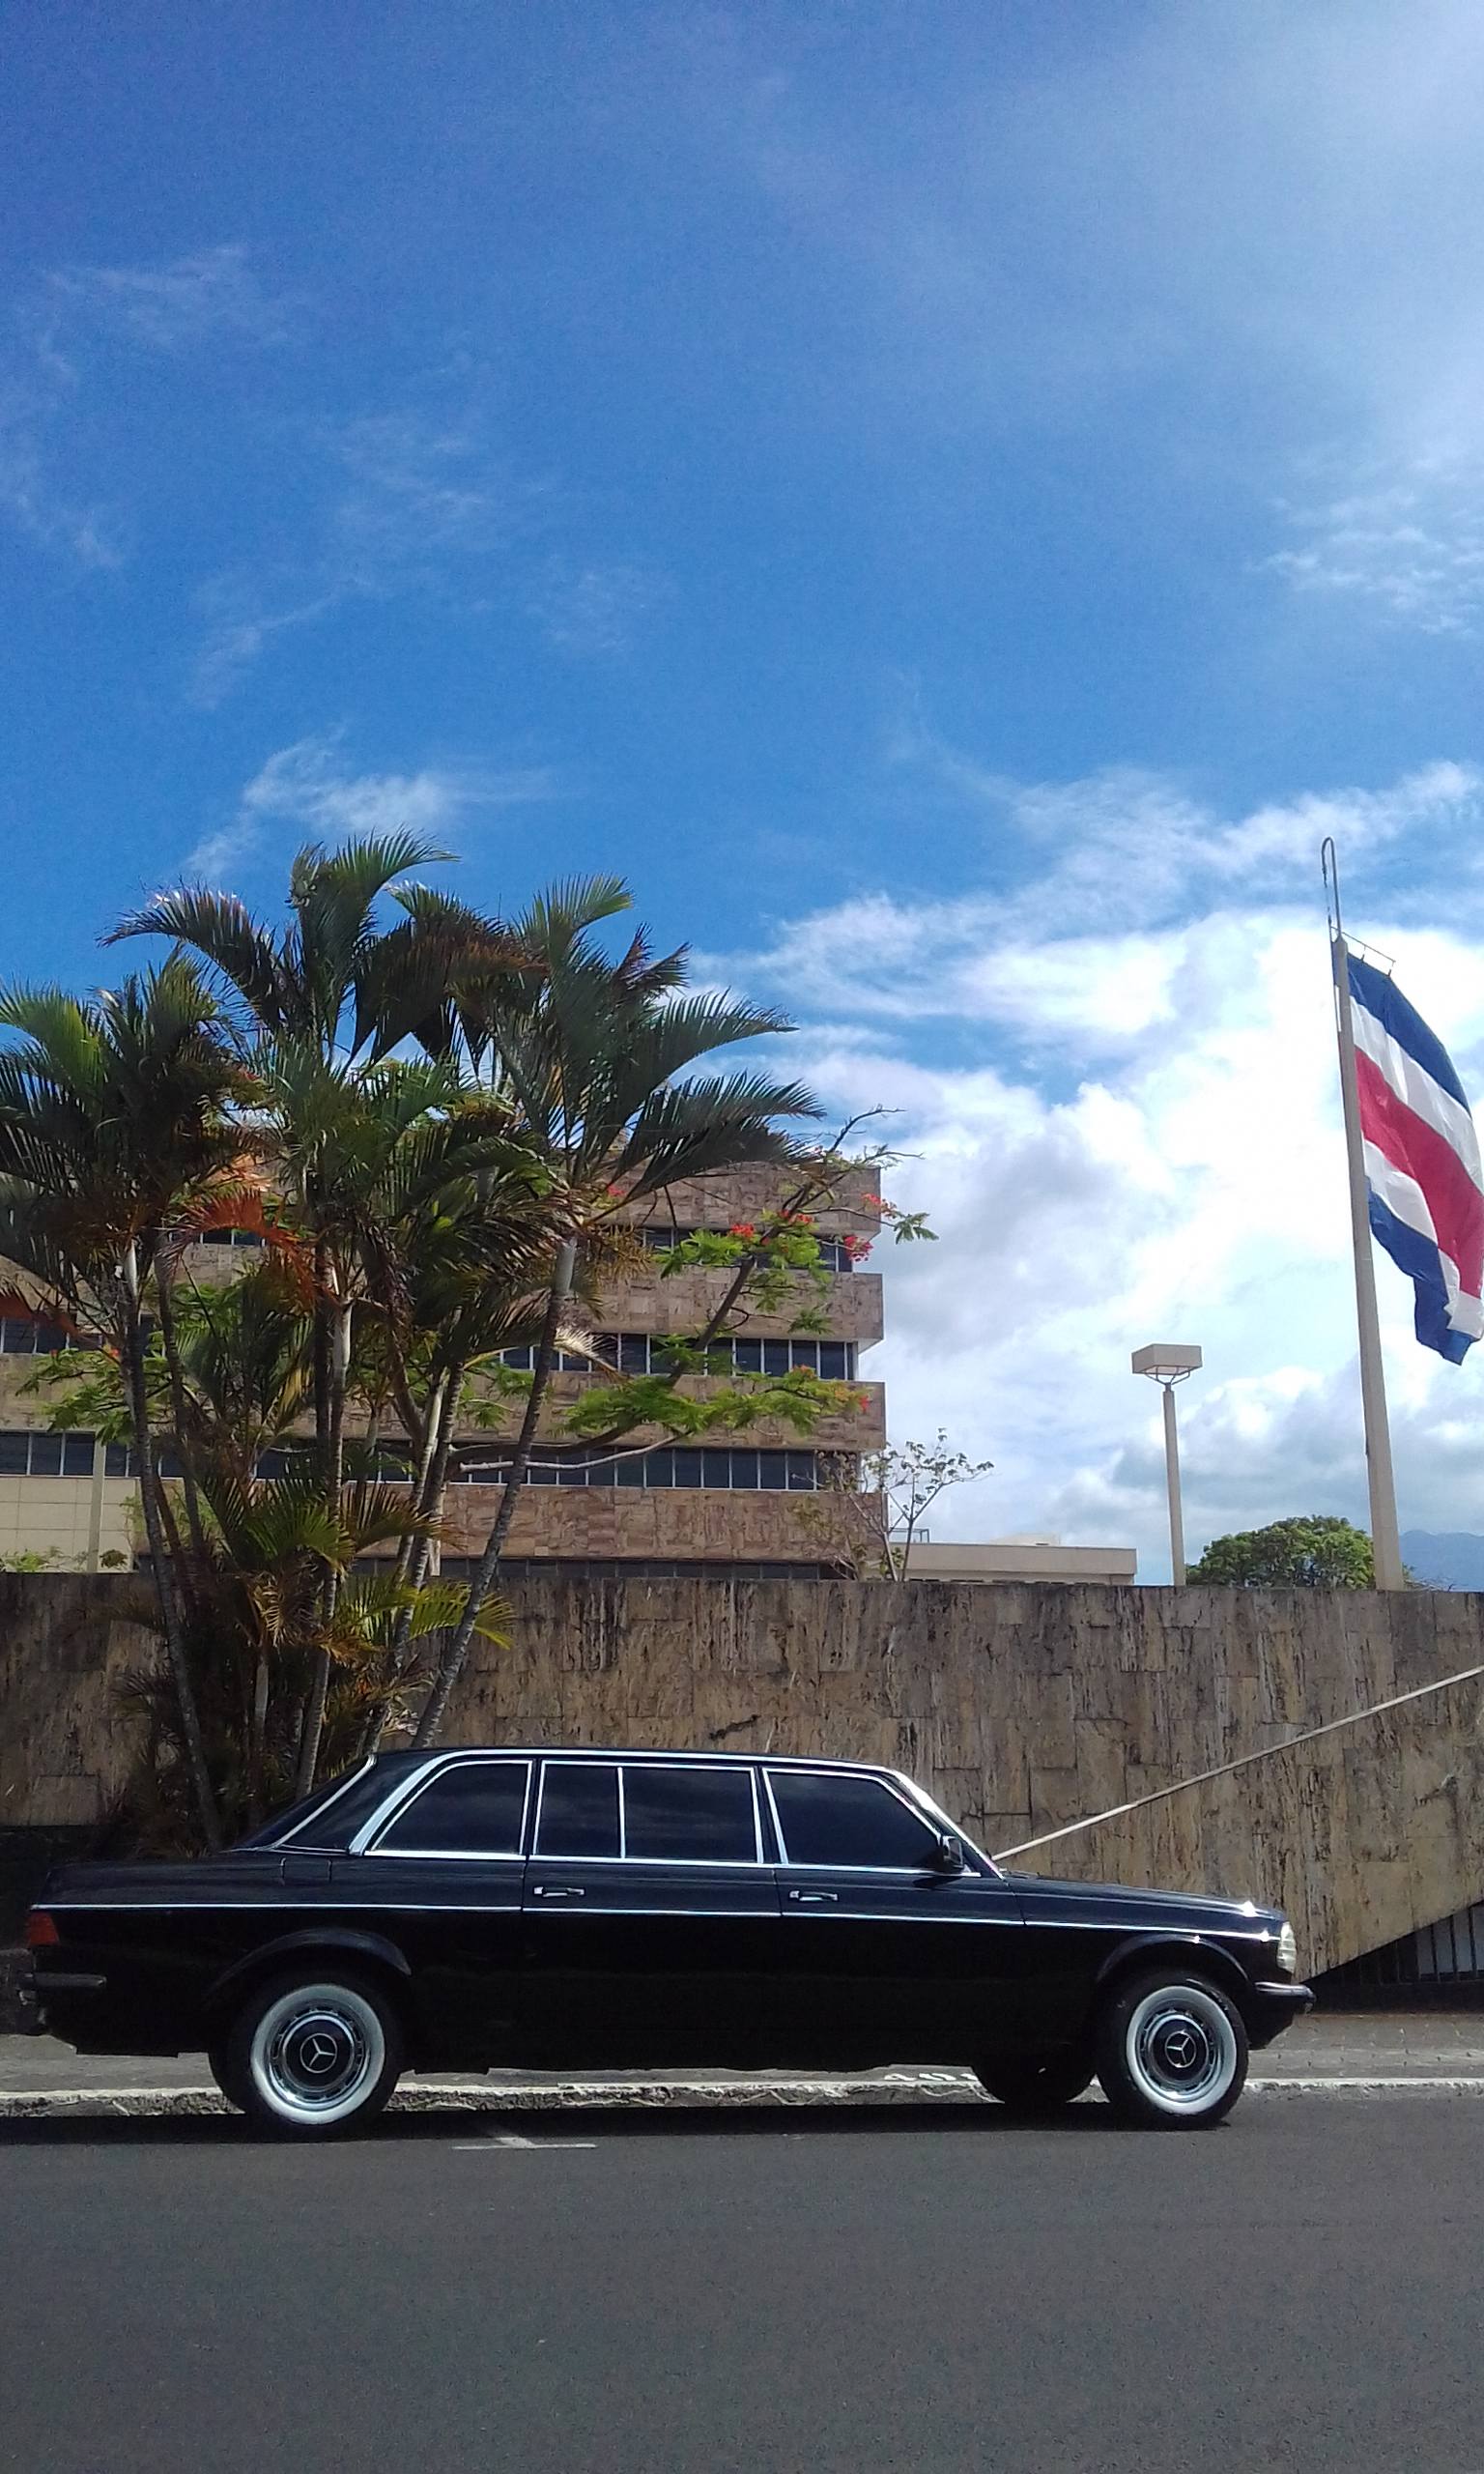 COSTA RICA BUILDING WITH A FLAG AND LIMOUSINE MERCEDES 300D